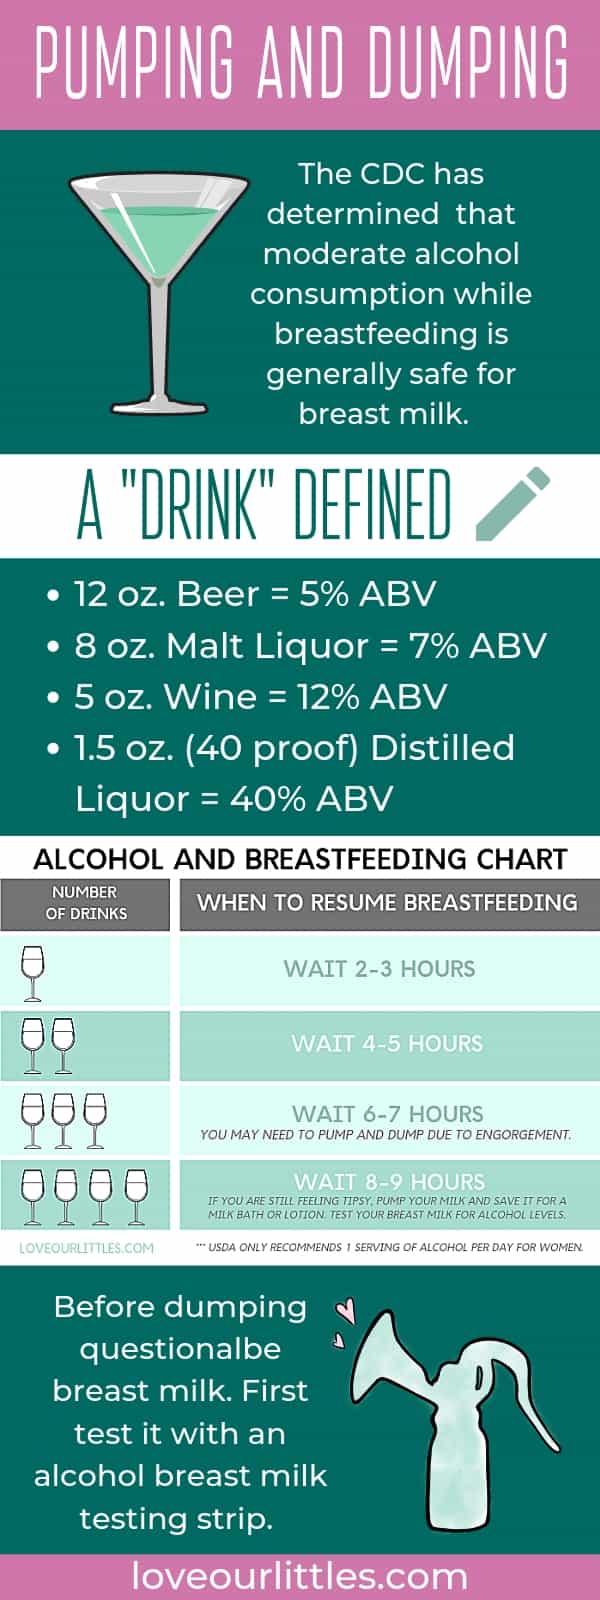 How long should i wait to breastfeed after drinking beer Pumping And Dumping Rules While Breastfeeding What Are The Facts